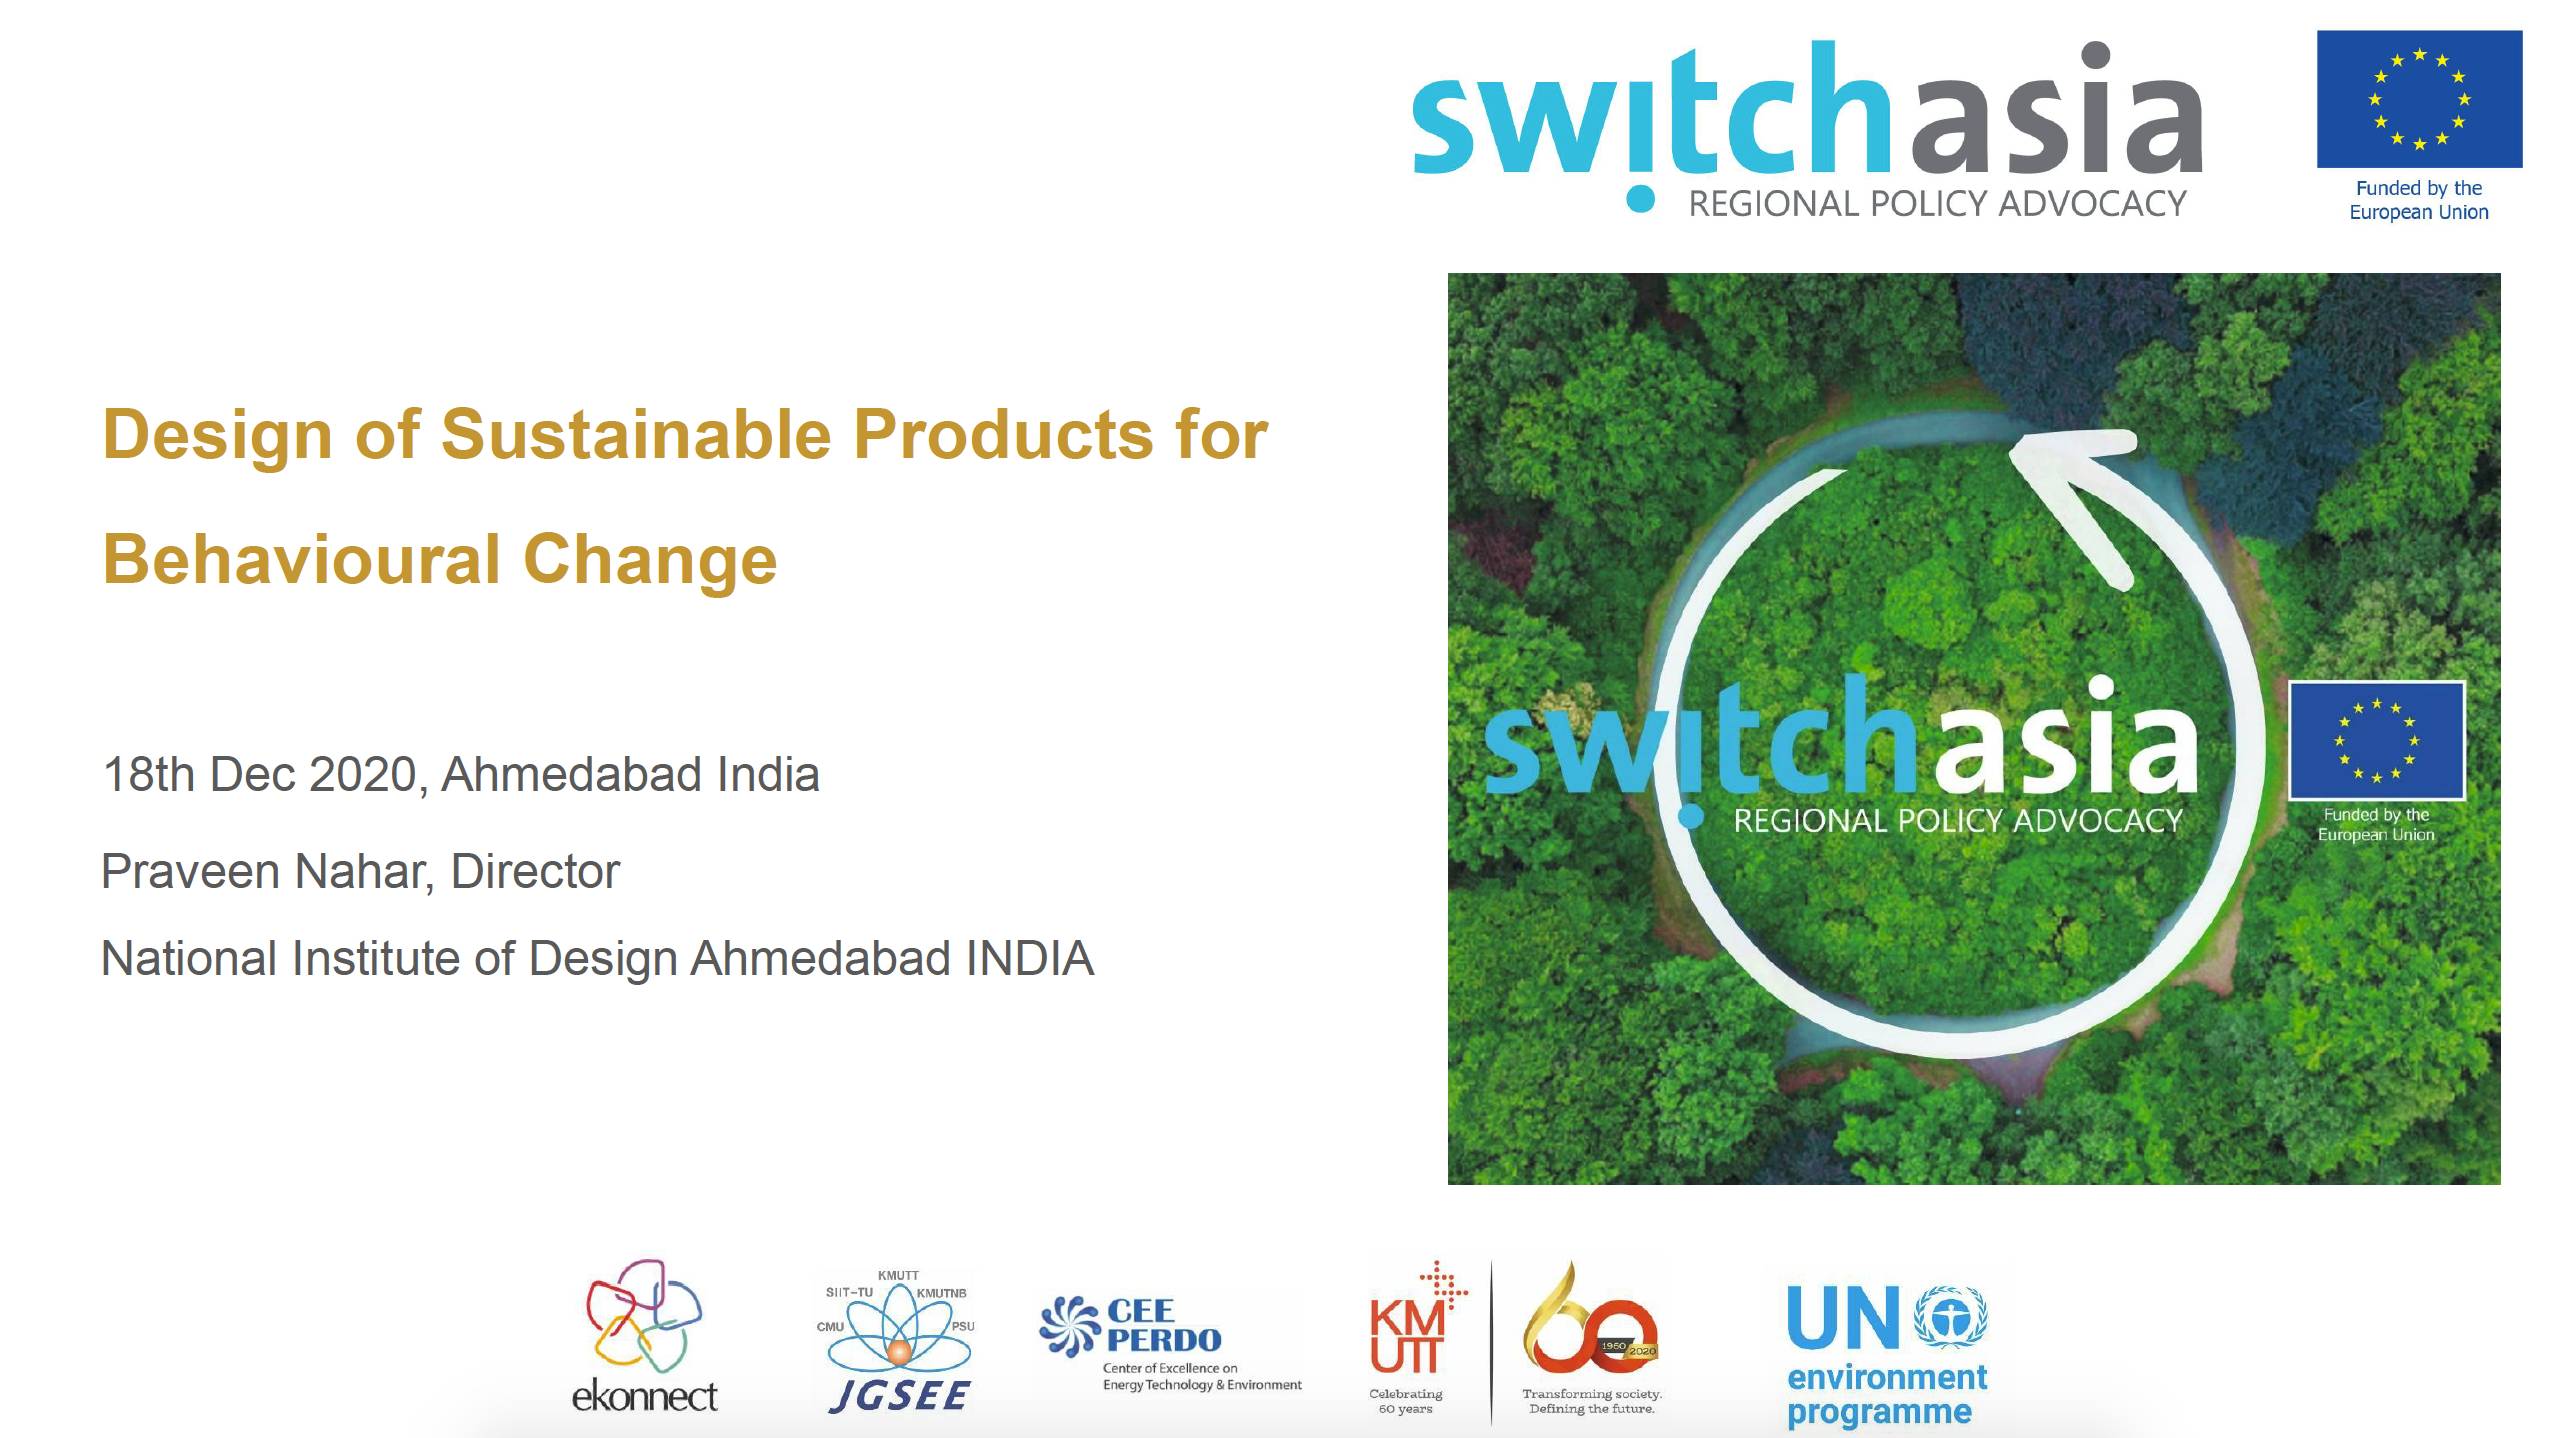 Design of Sustainable Products for Behavioural Change